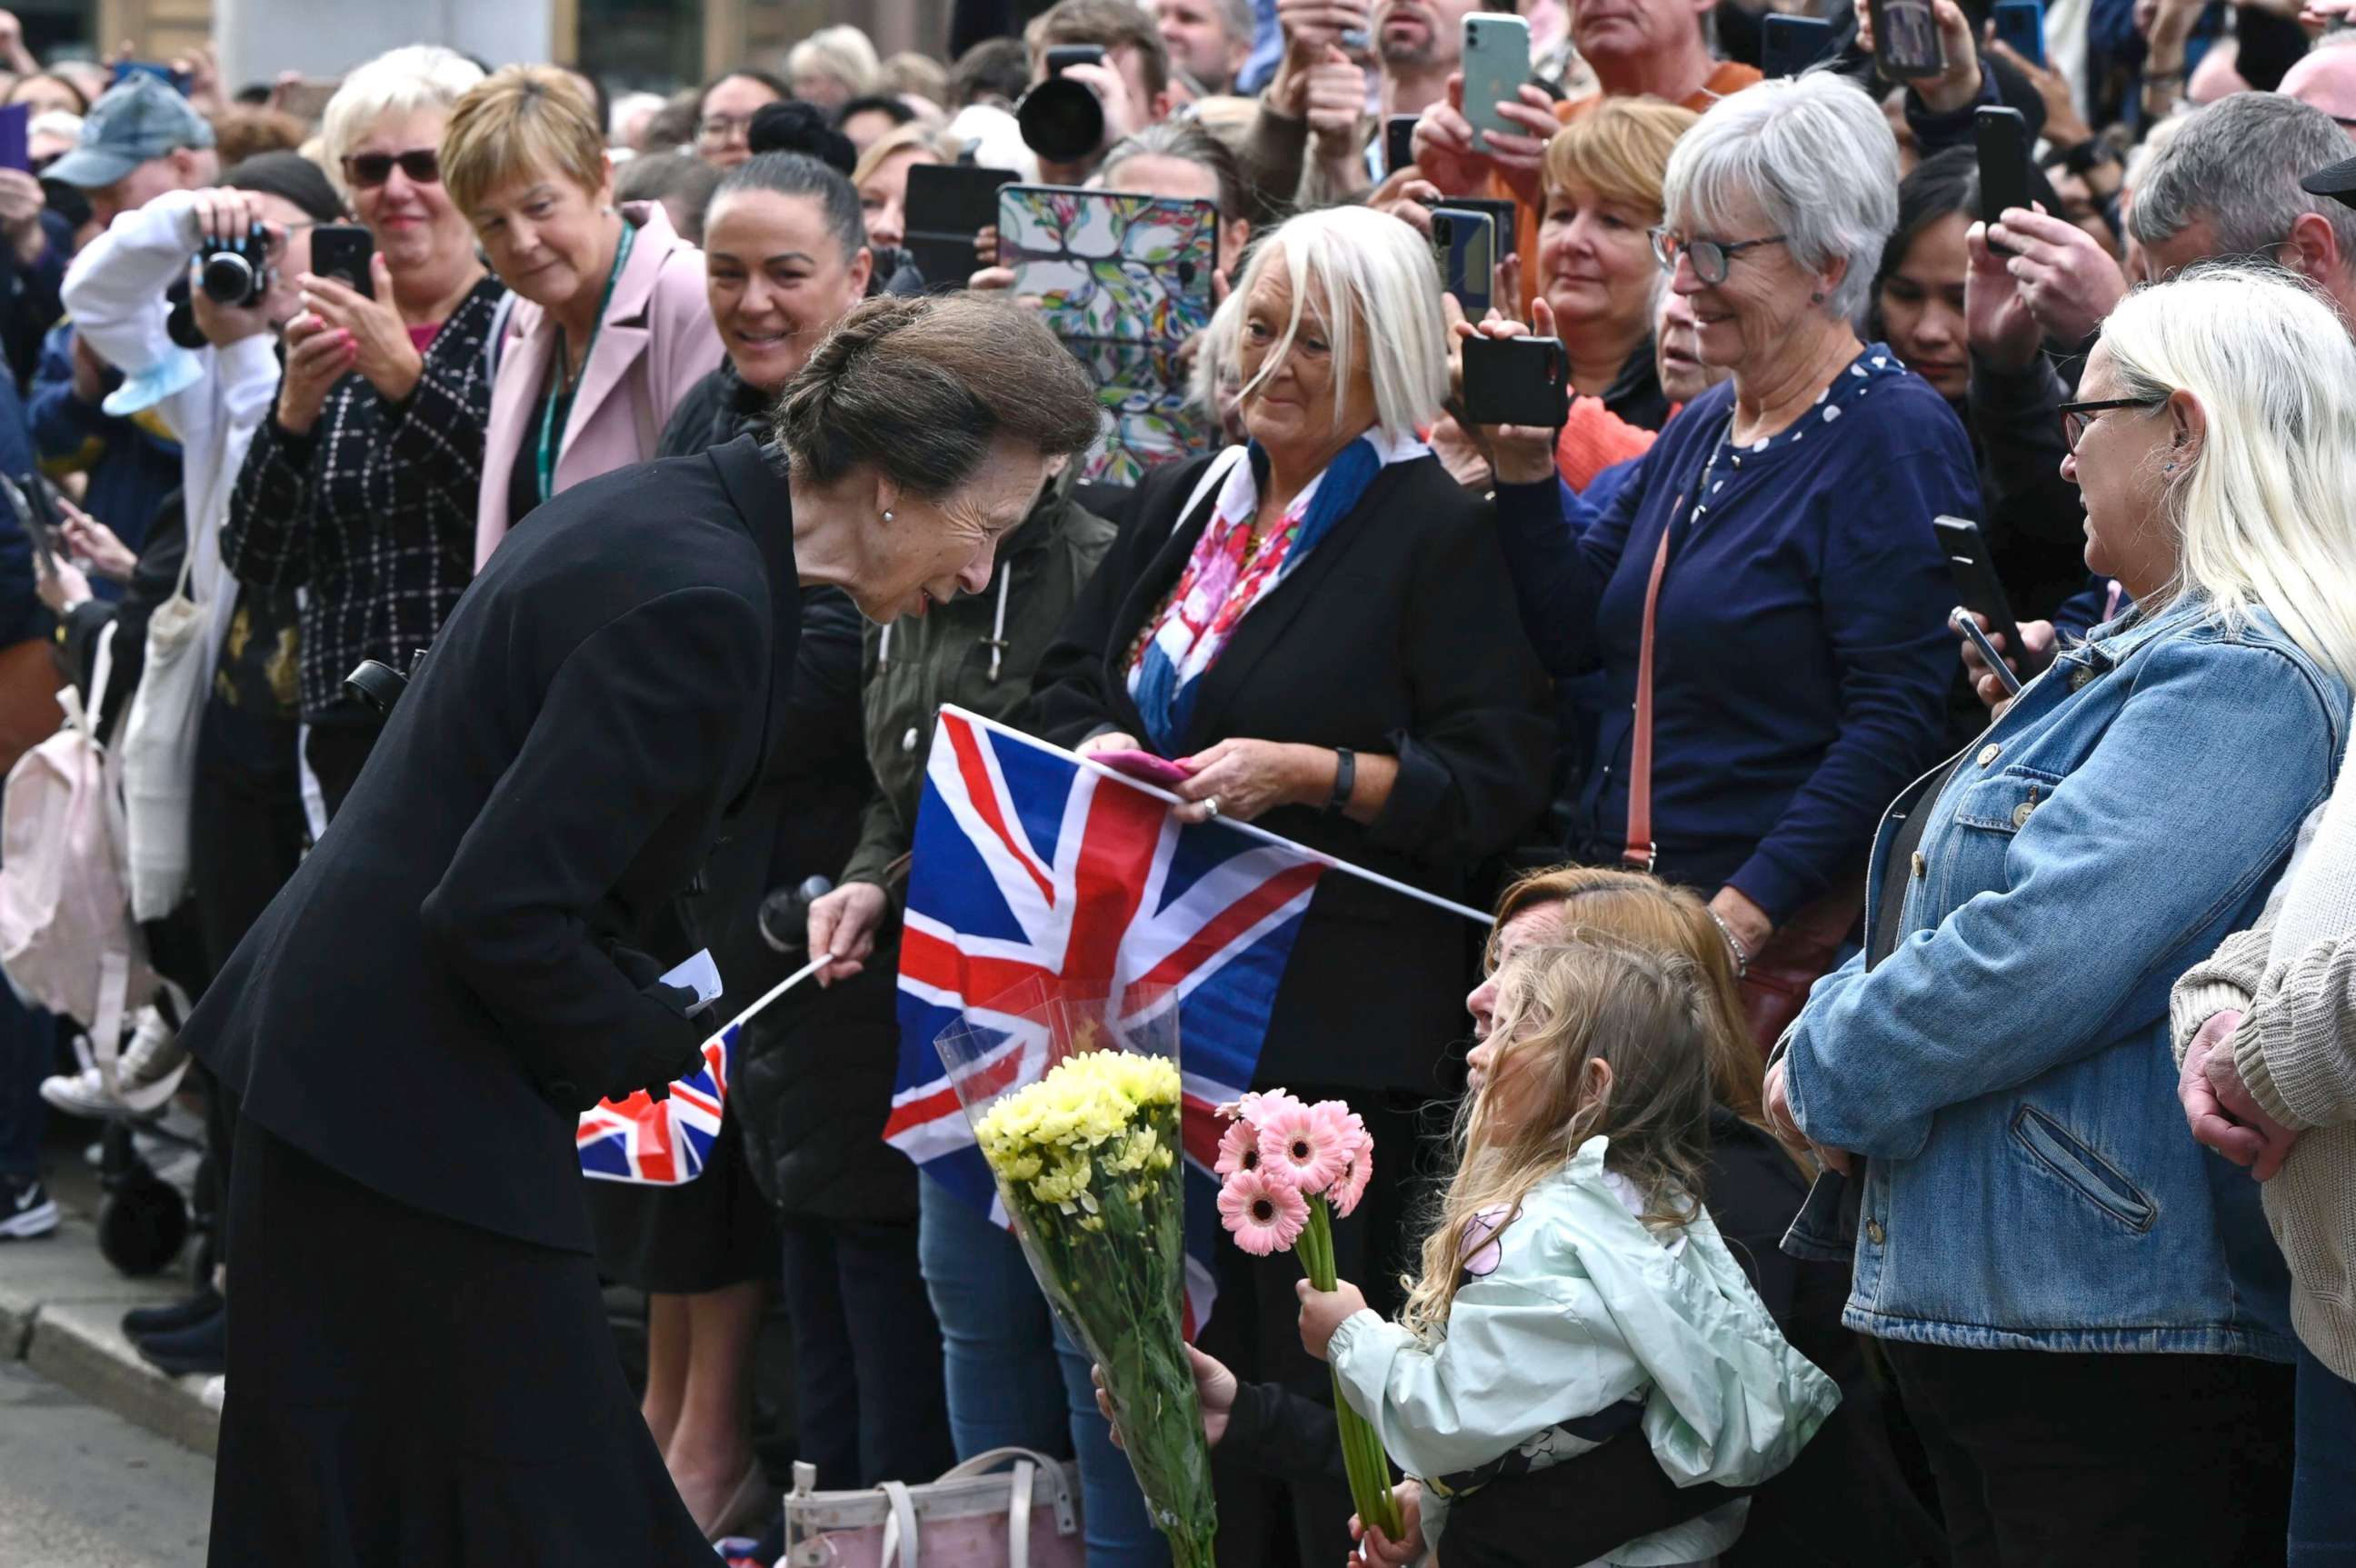 PHOTO: Princess Anne, the Princess Royal greets members of the public during a visit to Glasgow City Chambers to meet representatives of organizations of which Queen Elizabeth II was Patron, in Glasgow, Scotland, Sept. 15, 2022.